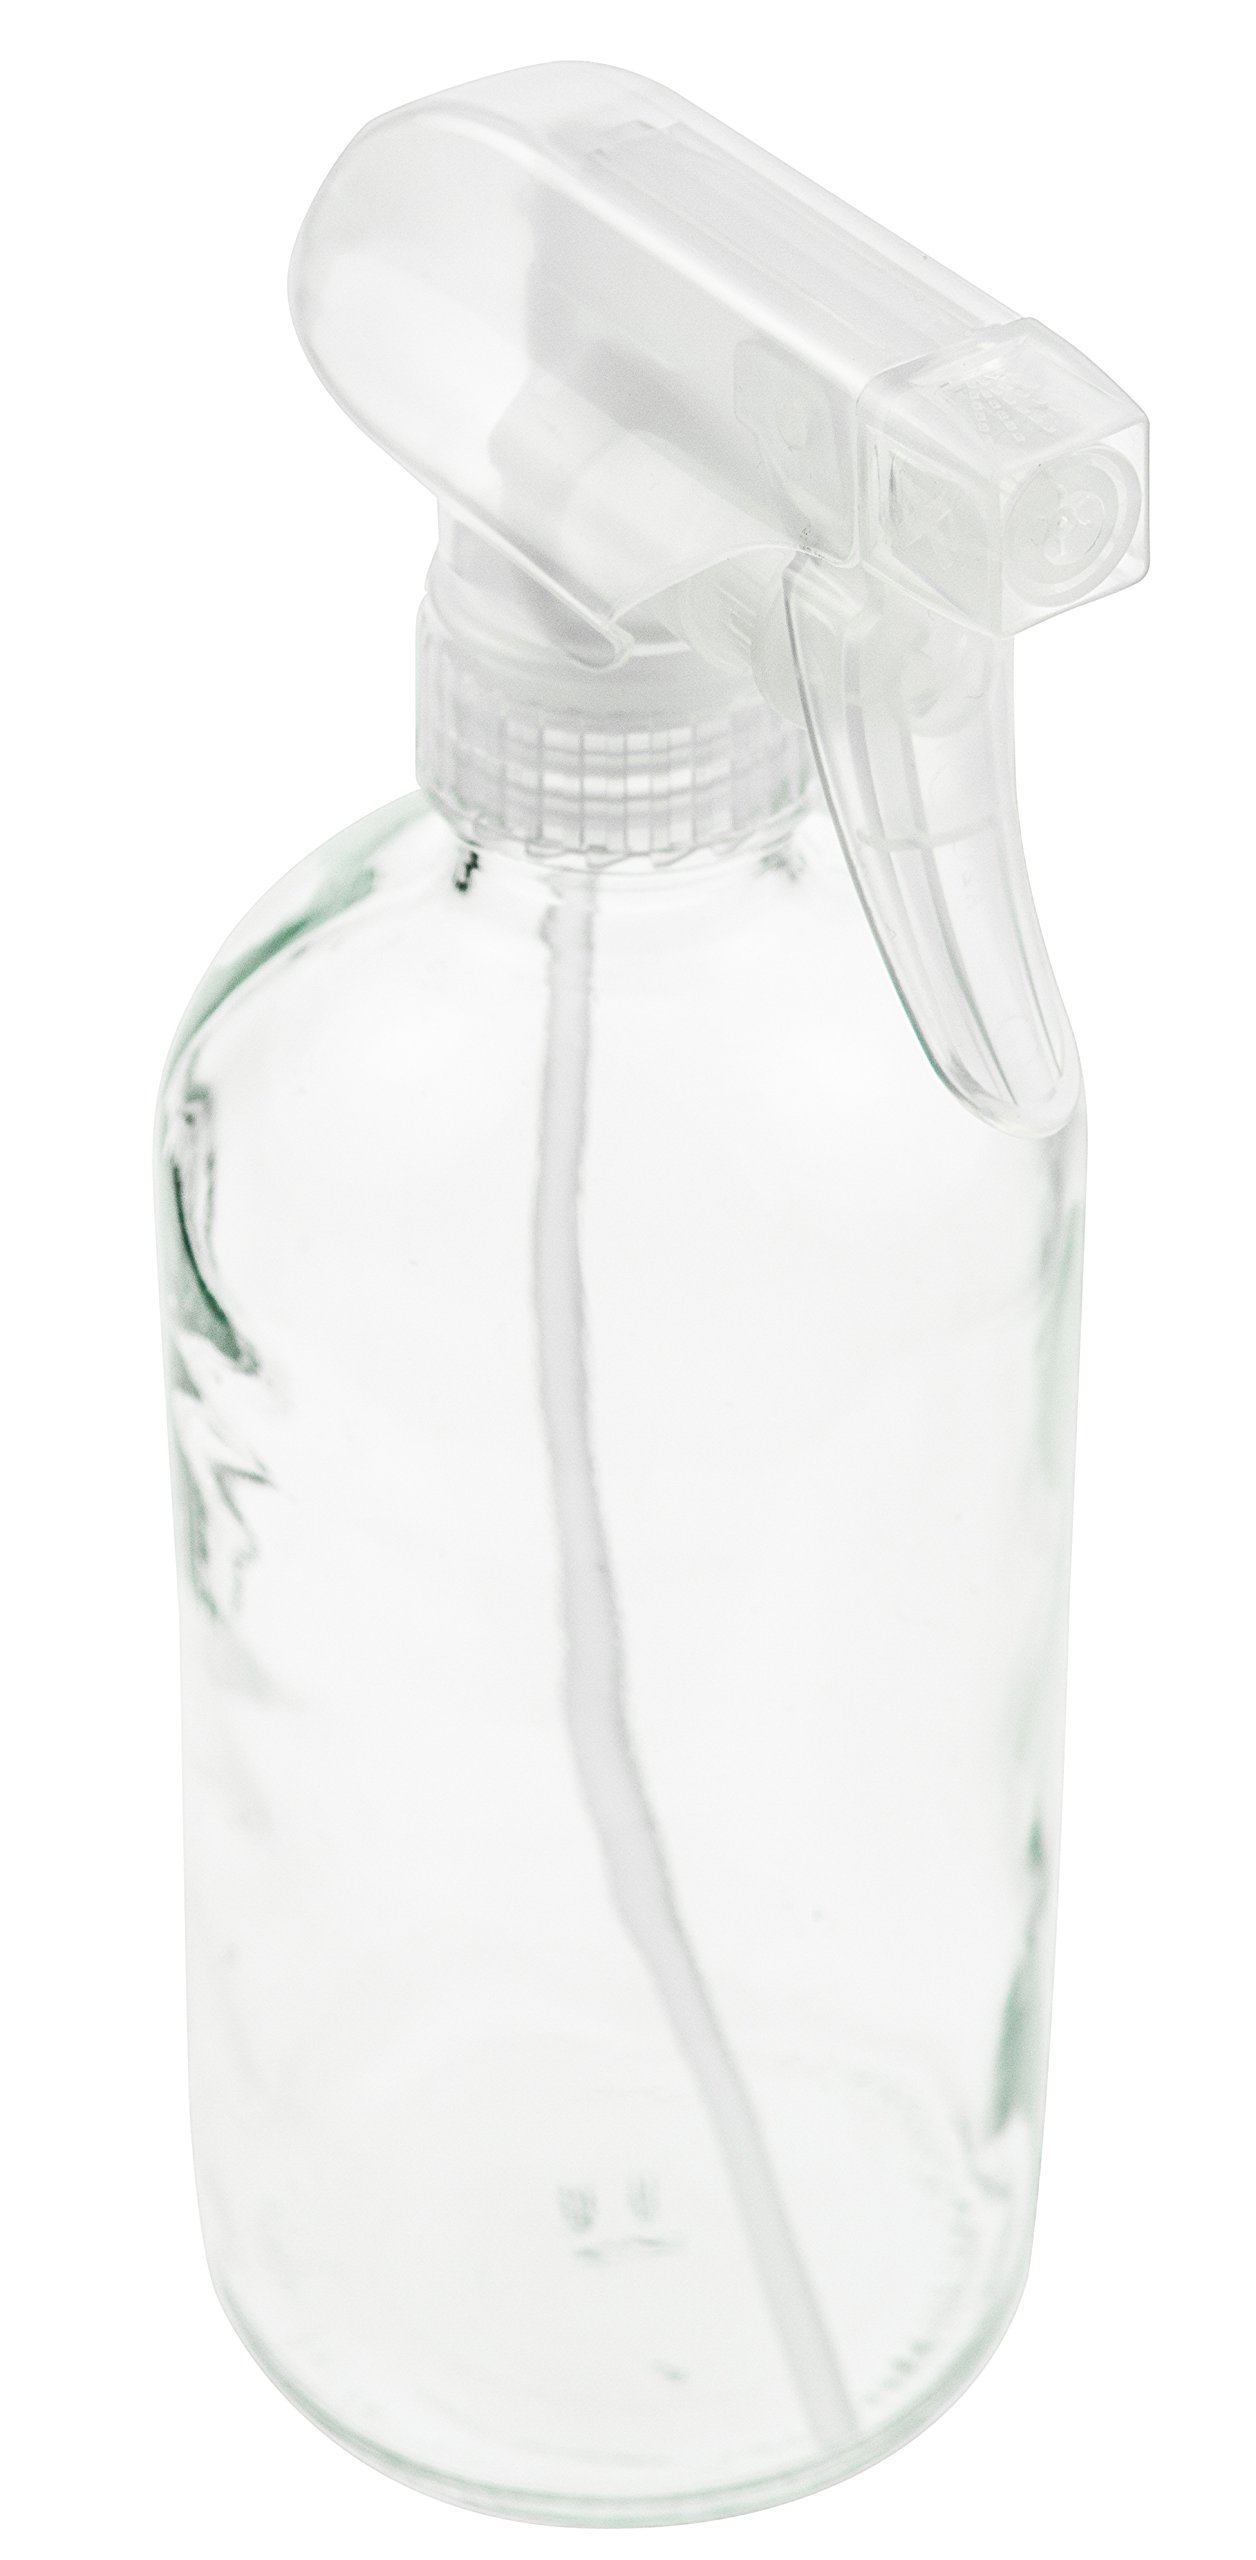 Glass Spray Bottle - Empty Refillable 16 oz Container is Great for Essential Oils, Cleaning Products, Homemade Cleaners, Aromatherapy, Misting Plants with Water, and Vinegar Mixtures for Cleaning